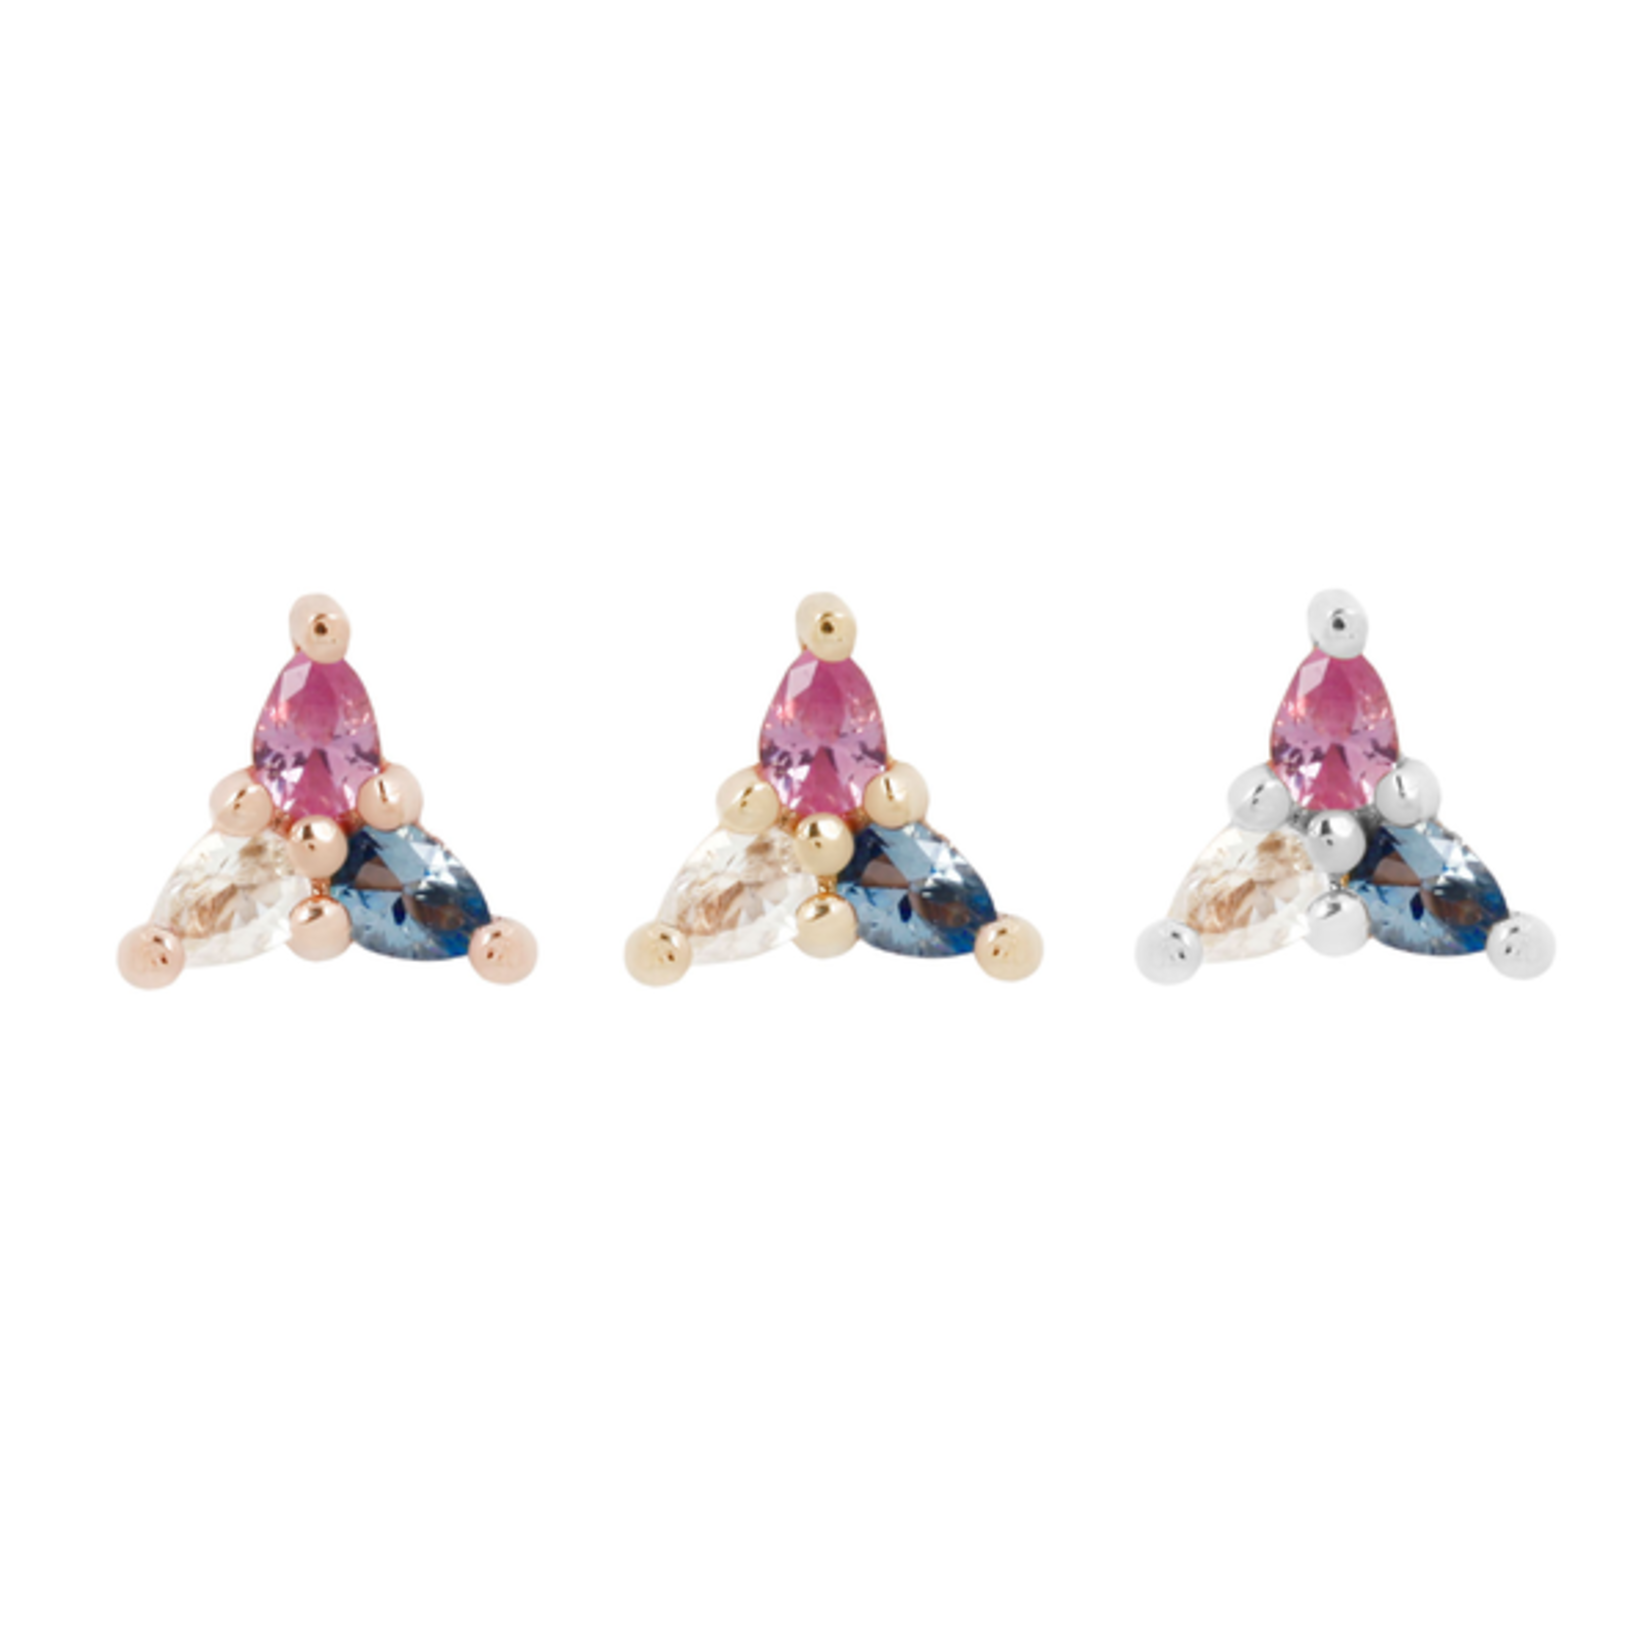 Buddha Jewelry Organics Buddha Jewelry Organics "3 Little Pears - Trans Awareness" press fit end with pink sapphire, London blue topaz, and white topaz